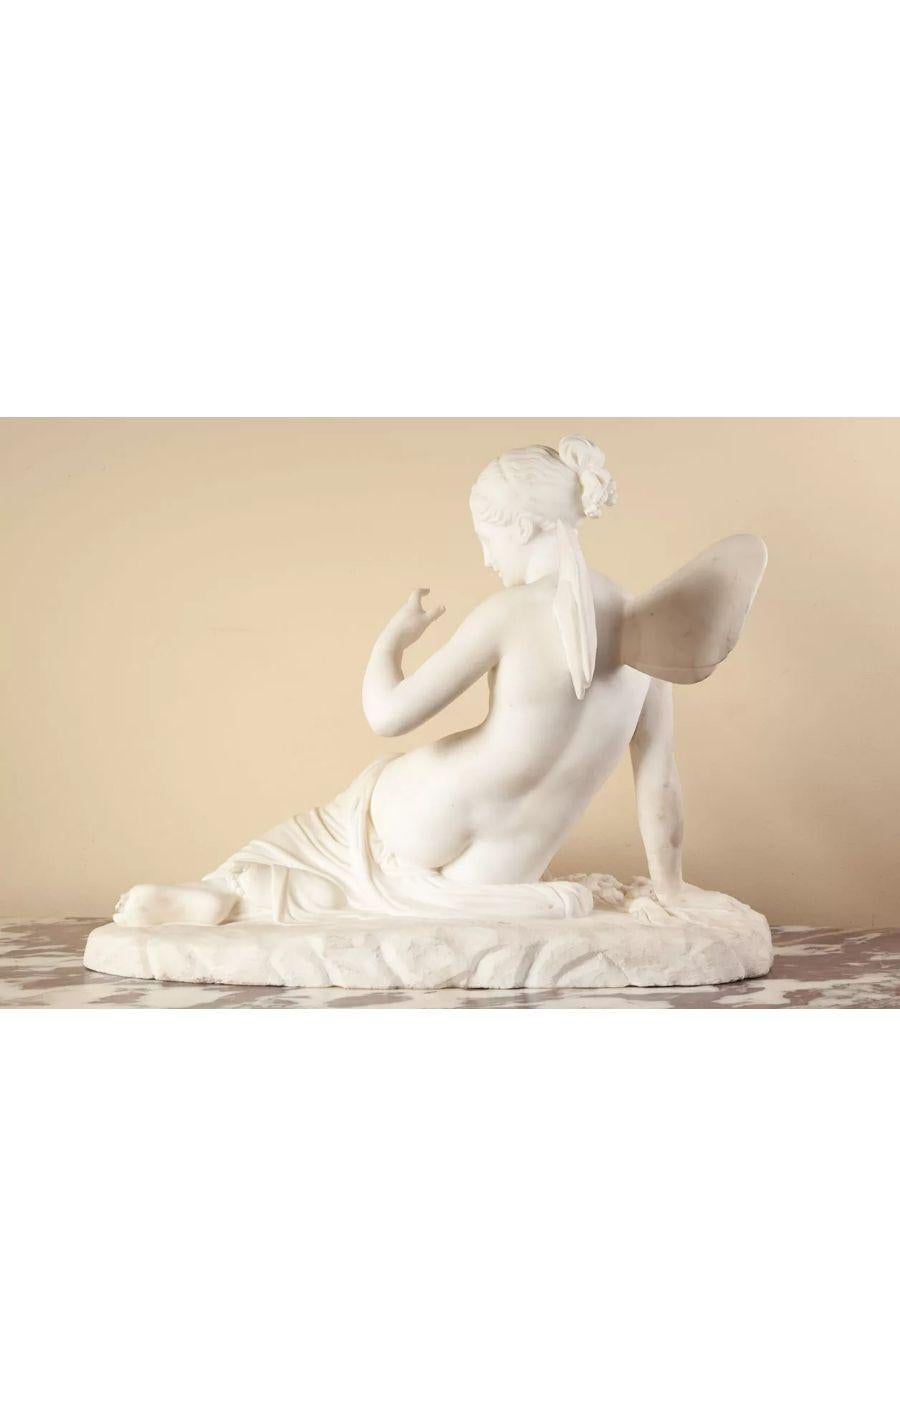 A finely carved white statuary marble figure of Psyche.

In Greek mythology, Psyche is the goddess of the soul and wife of Eros, god of love. She was the most beautiful girl in the world, much envied by Aphrodite, the goddess of love and beauty. In